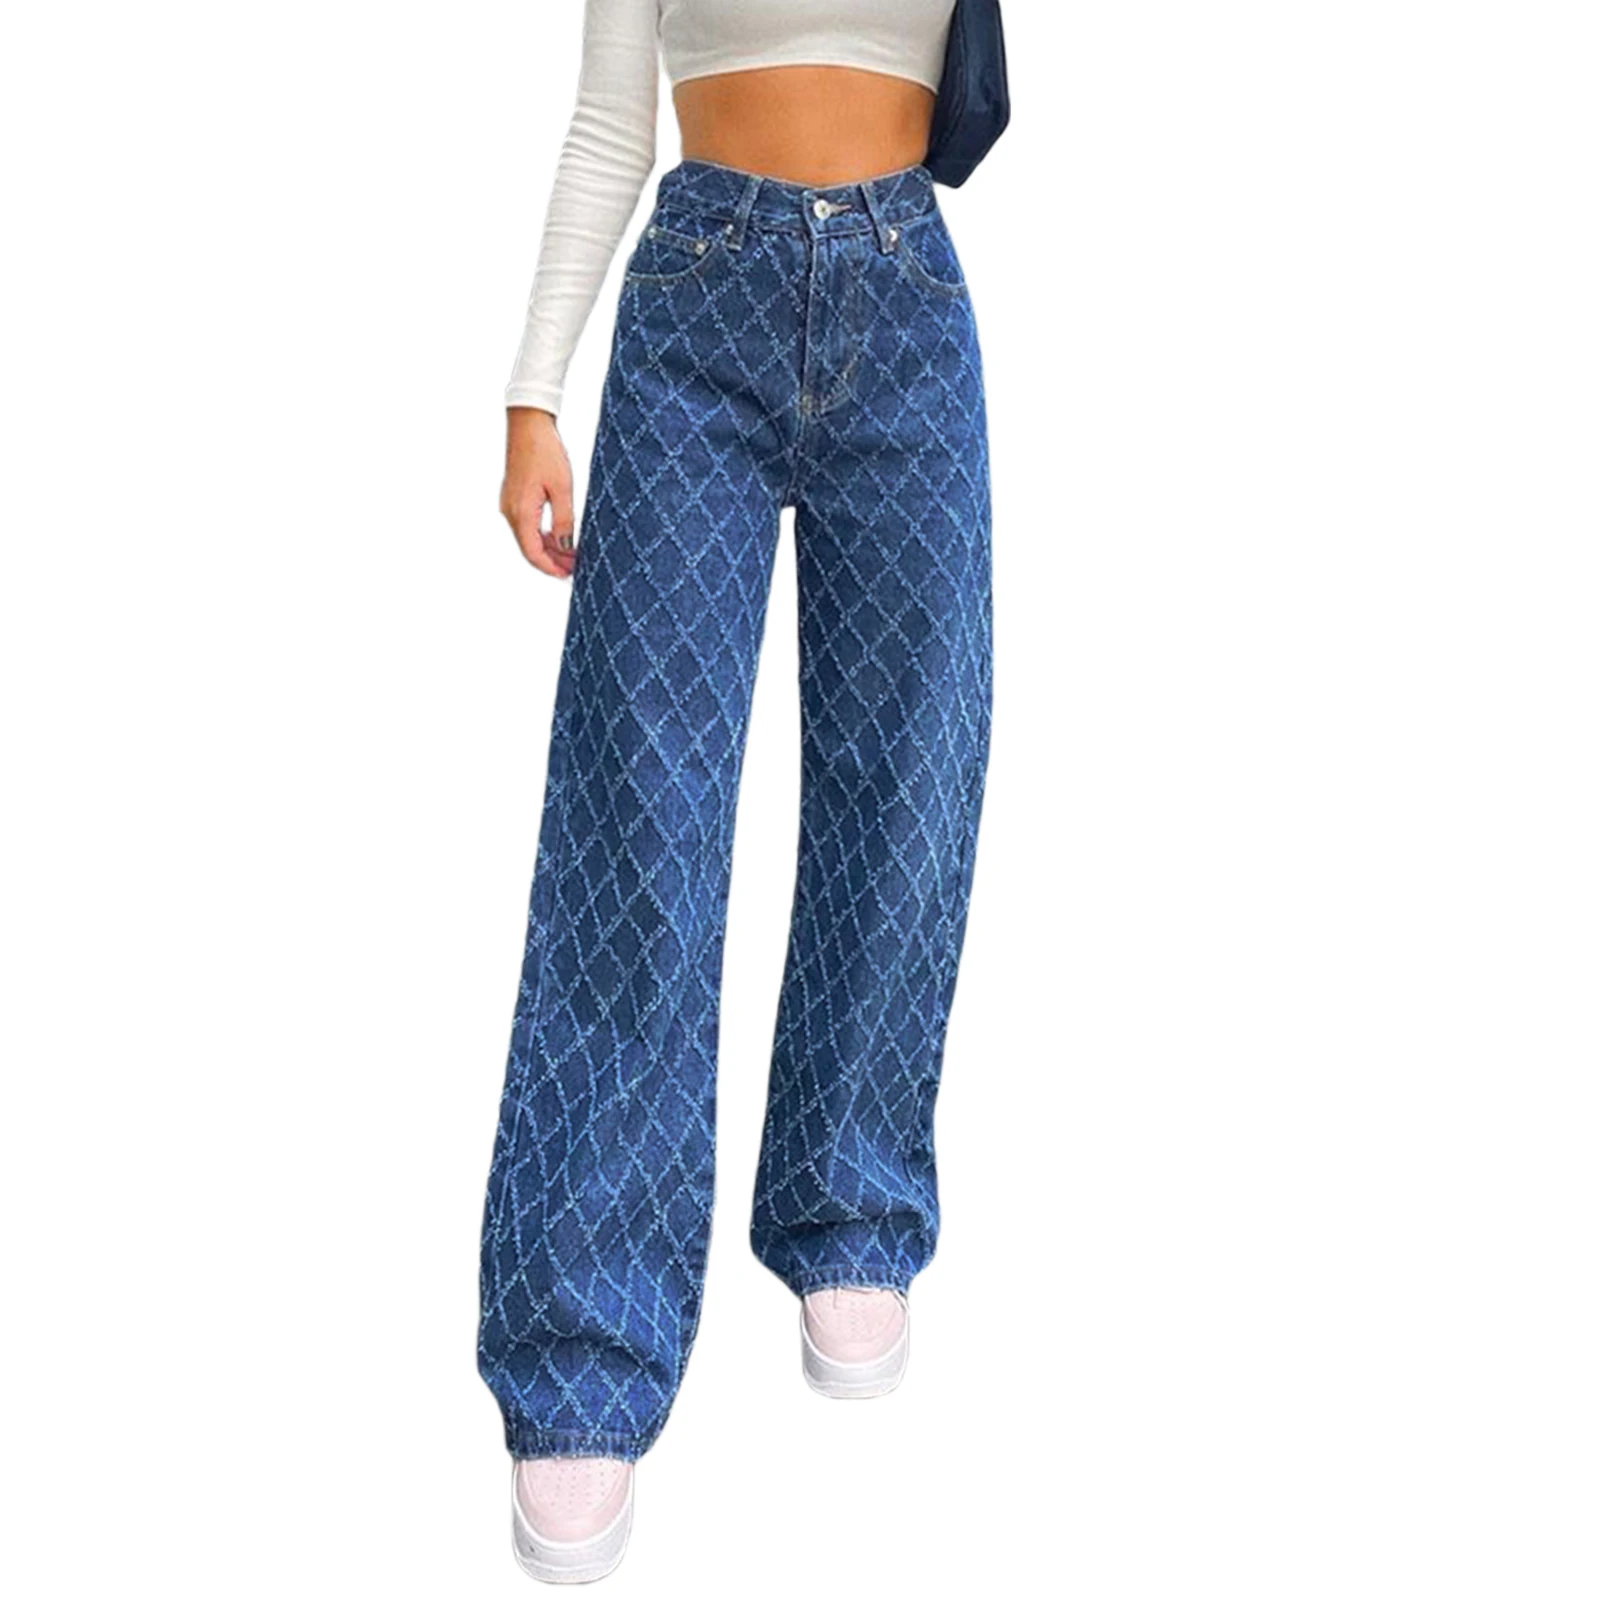 Nice Pop Female Jeans, Rhomboid Pattern High Waist Trousers Close-Fitting Pants For Spring Fall, Blue, S/M/L